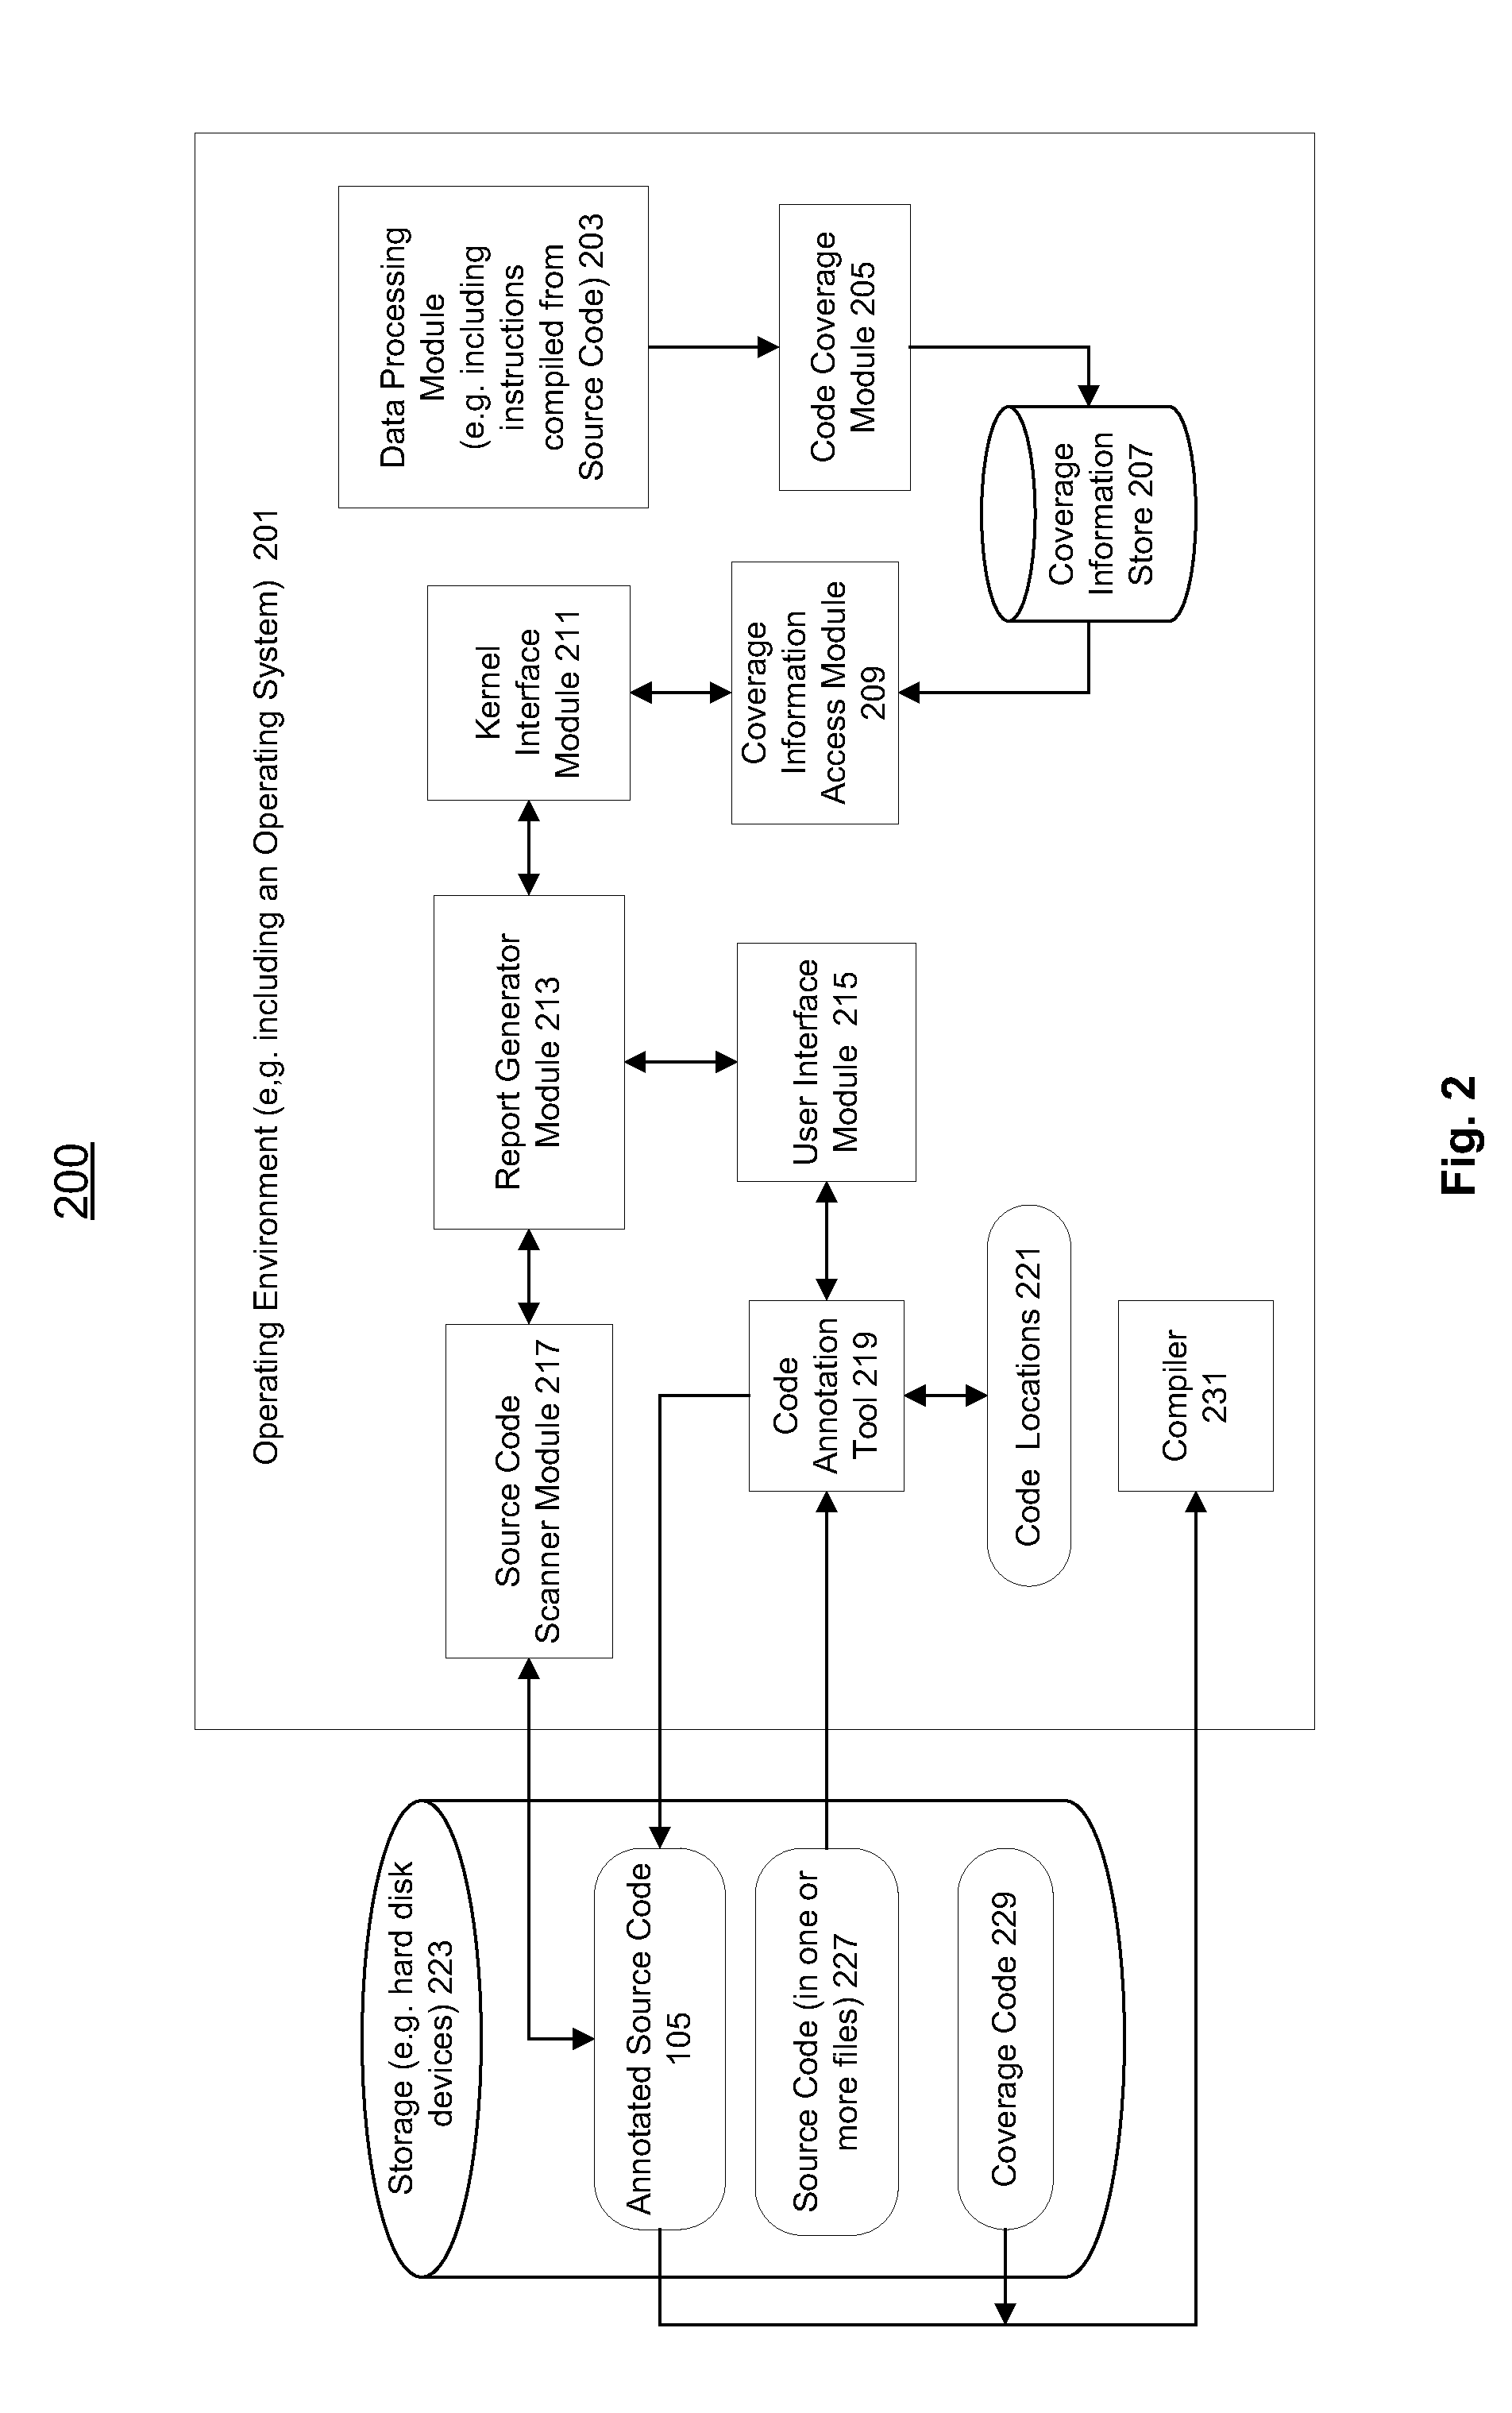 Methods and apparatuses for selective code coverage